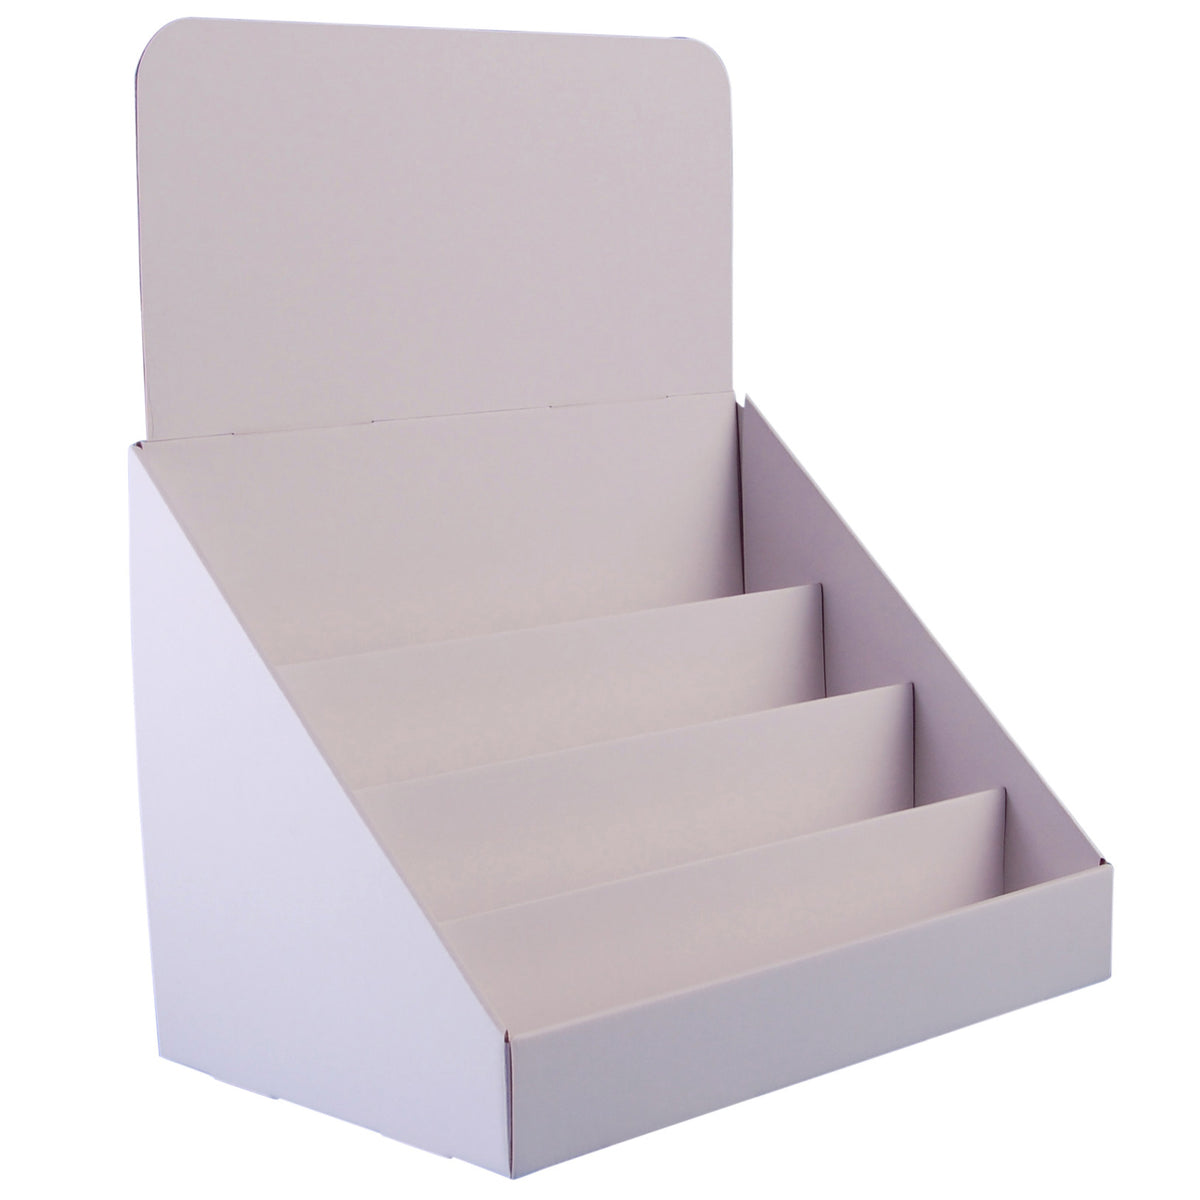 card stand